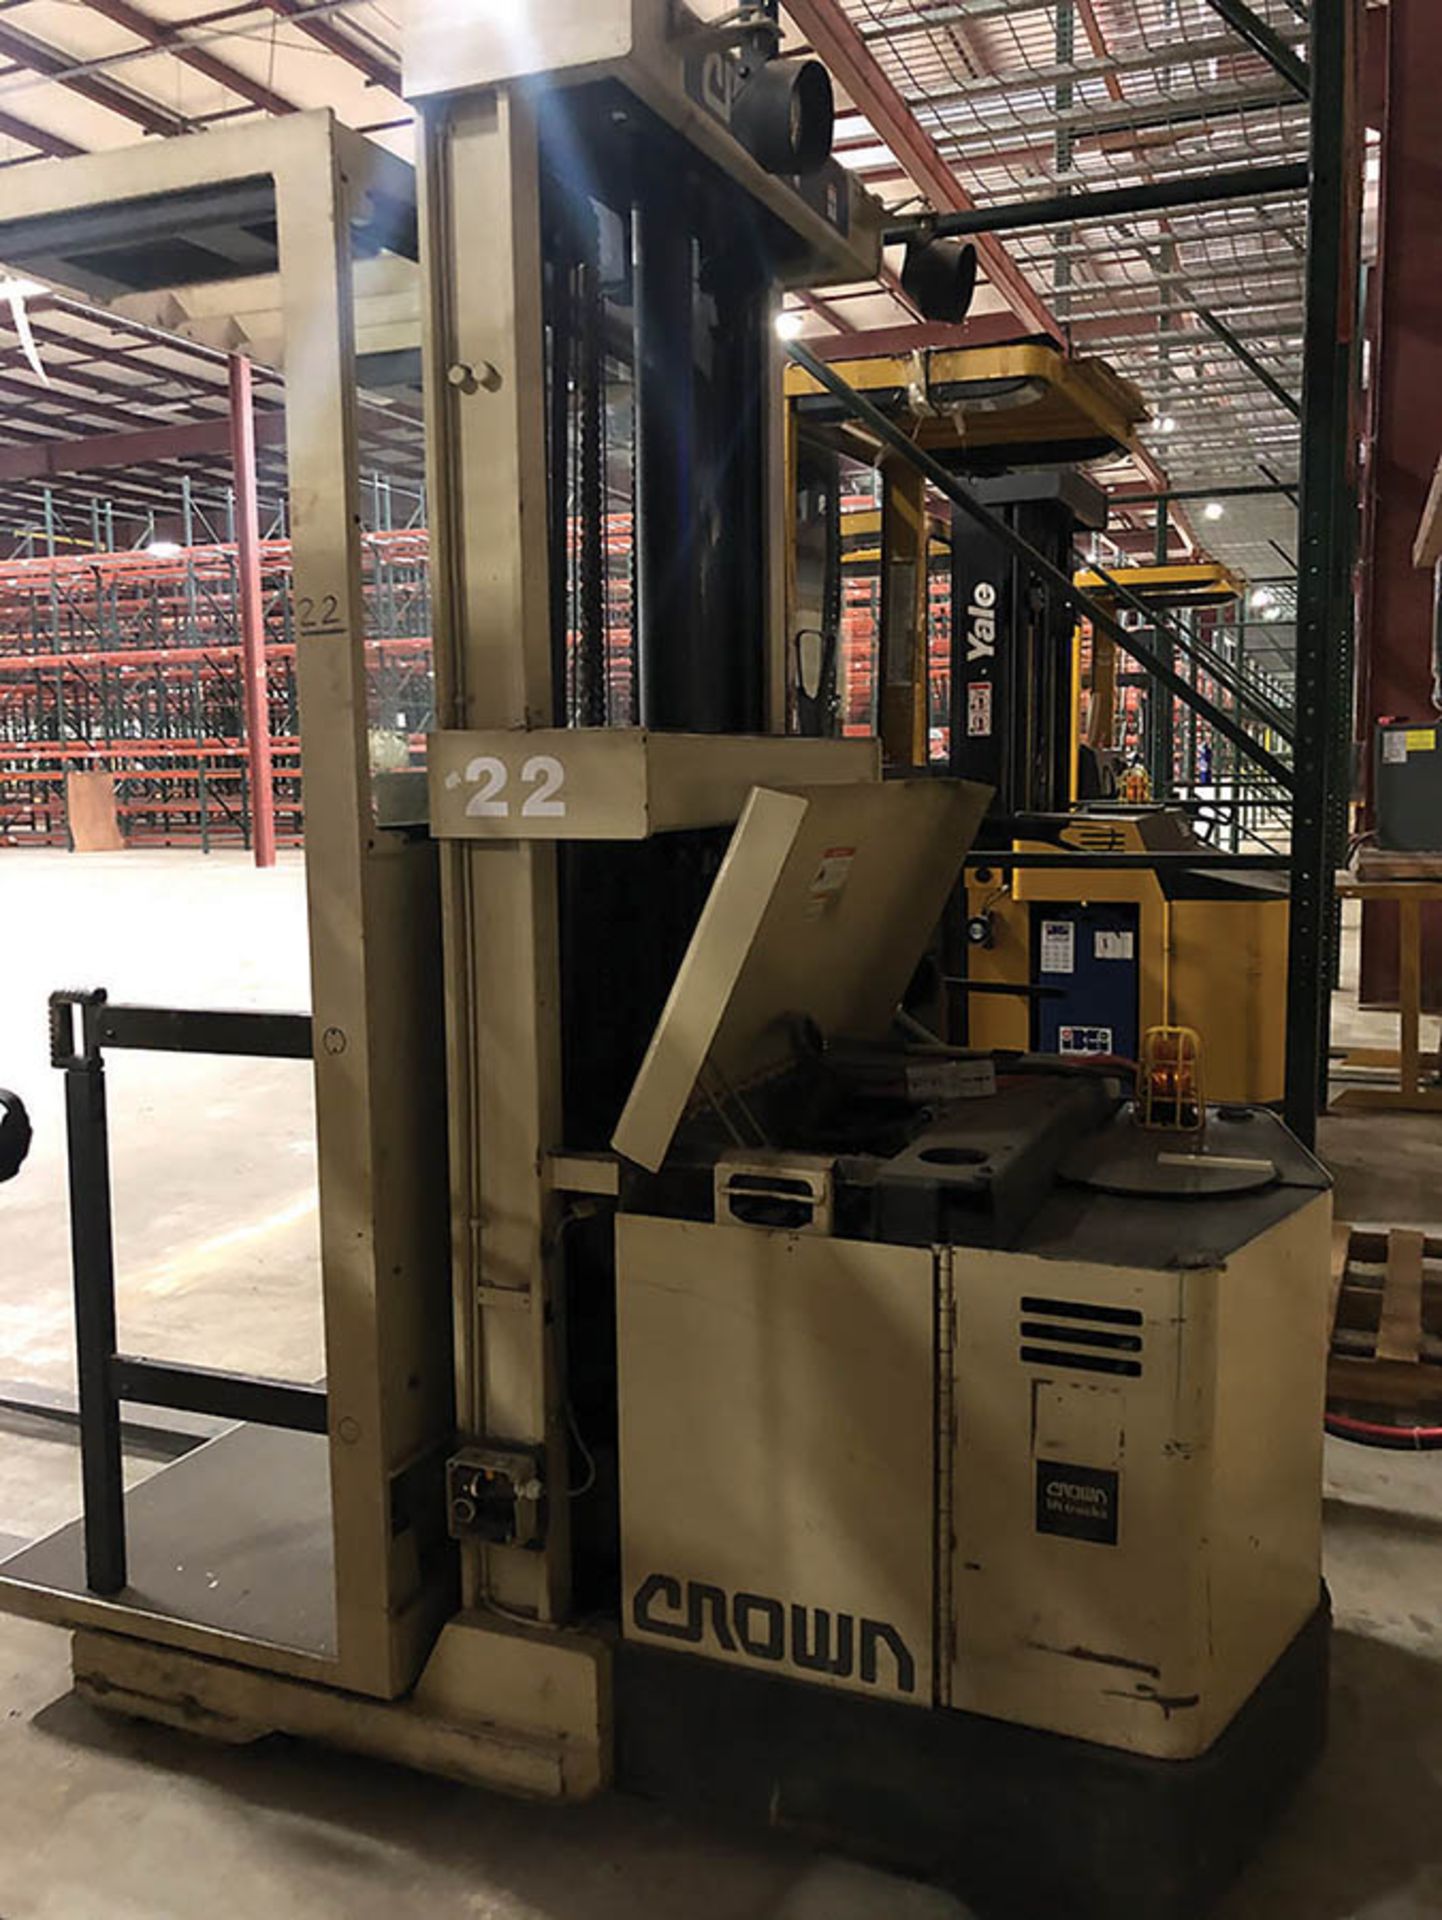 CROWN 3000 LB ORDER PICKER, S/N- 1A182734, 24 V, TRUCK TYPE E, 6,578 HOURS - Image 2 of 3